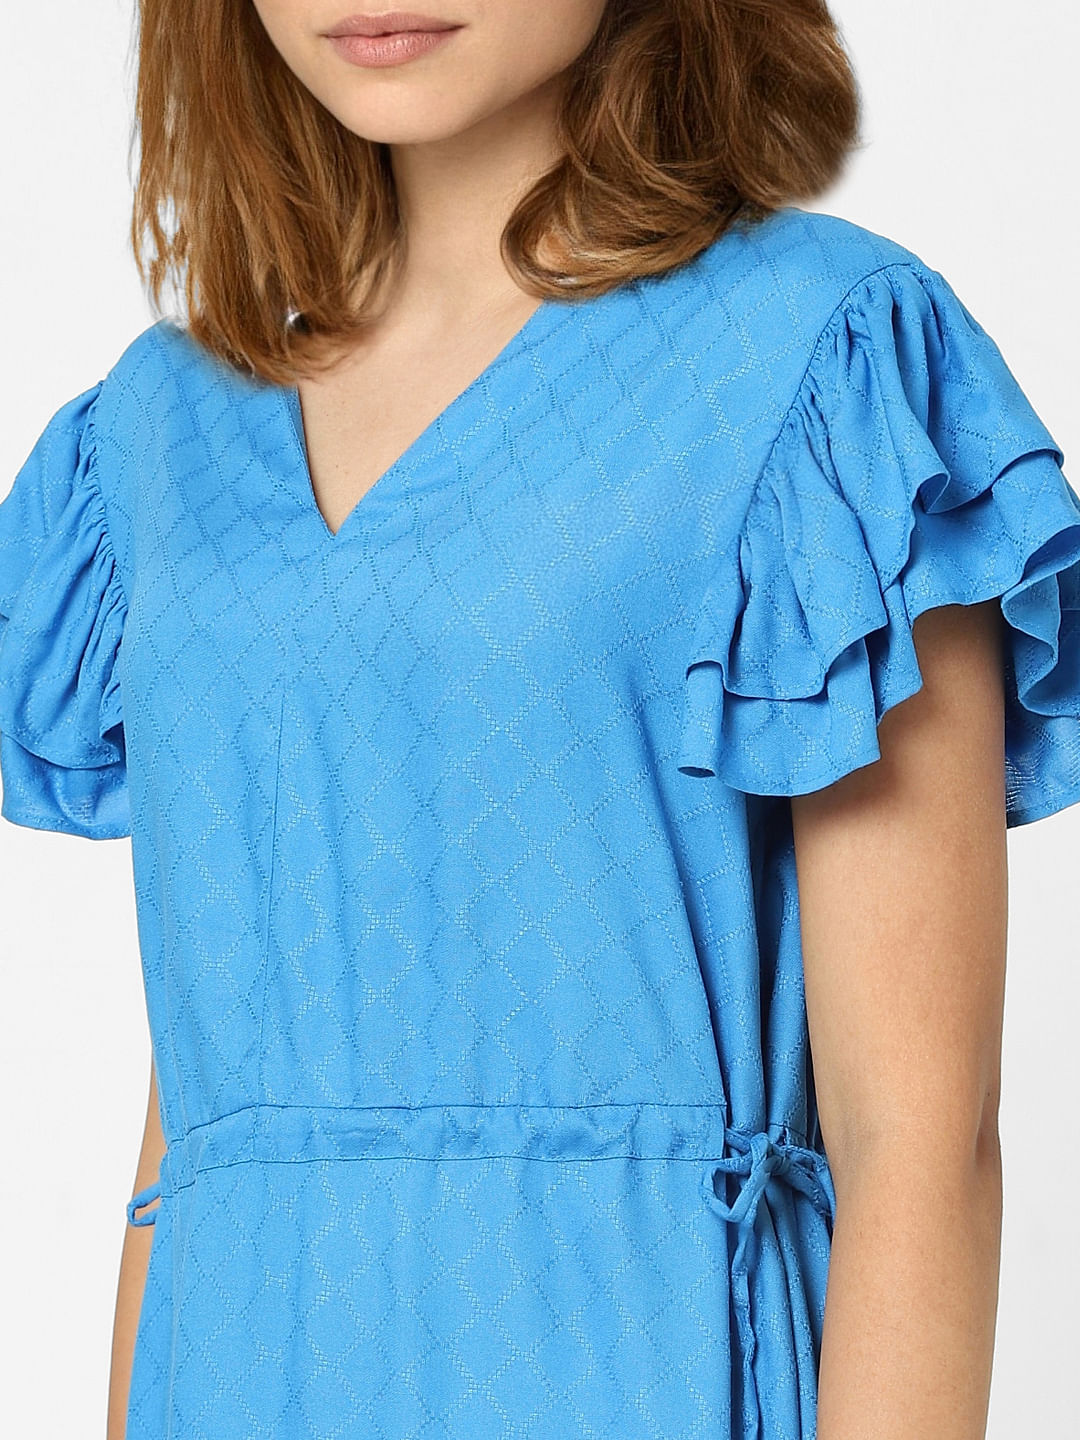 Blue Tie-String Shift Dress|296867603-French-Blue